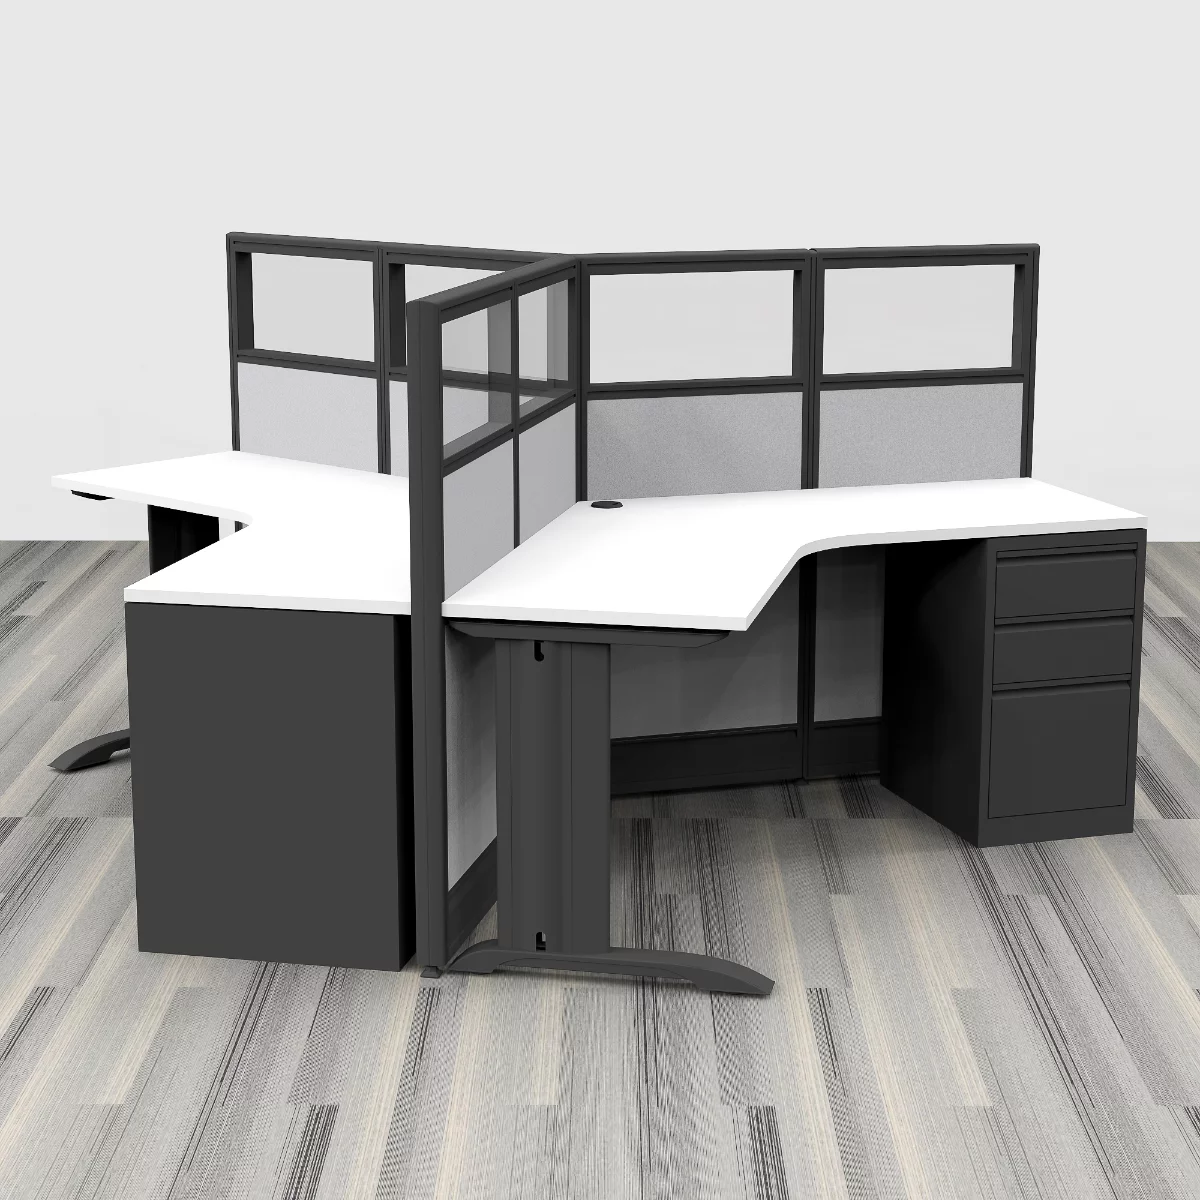 Render of 3-Person Cubicle Workstation